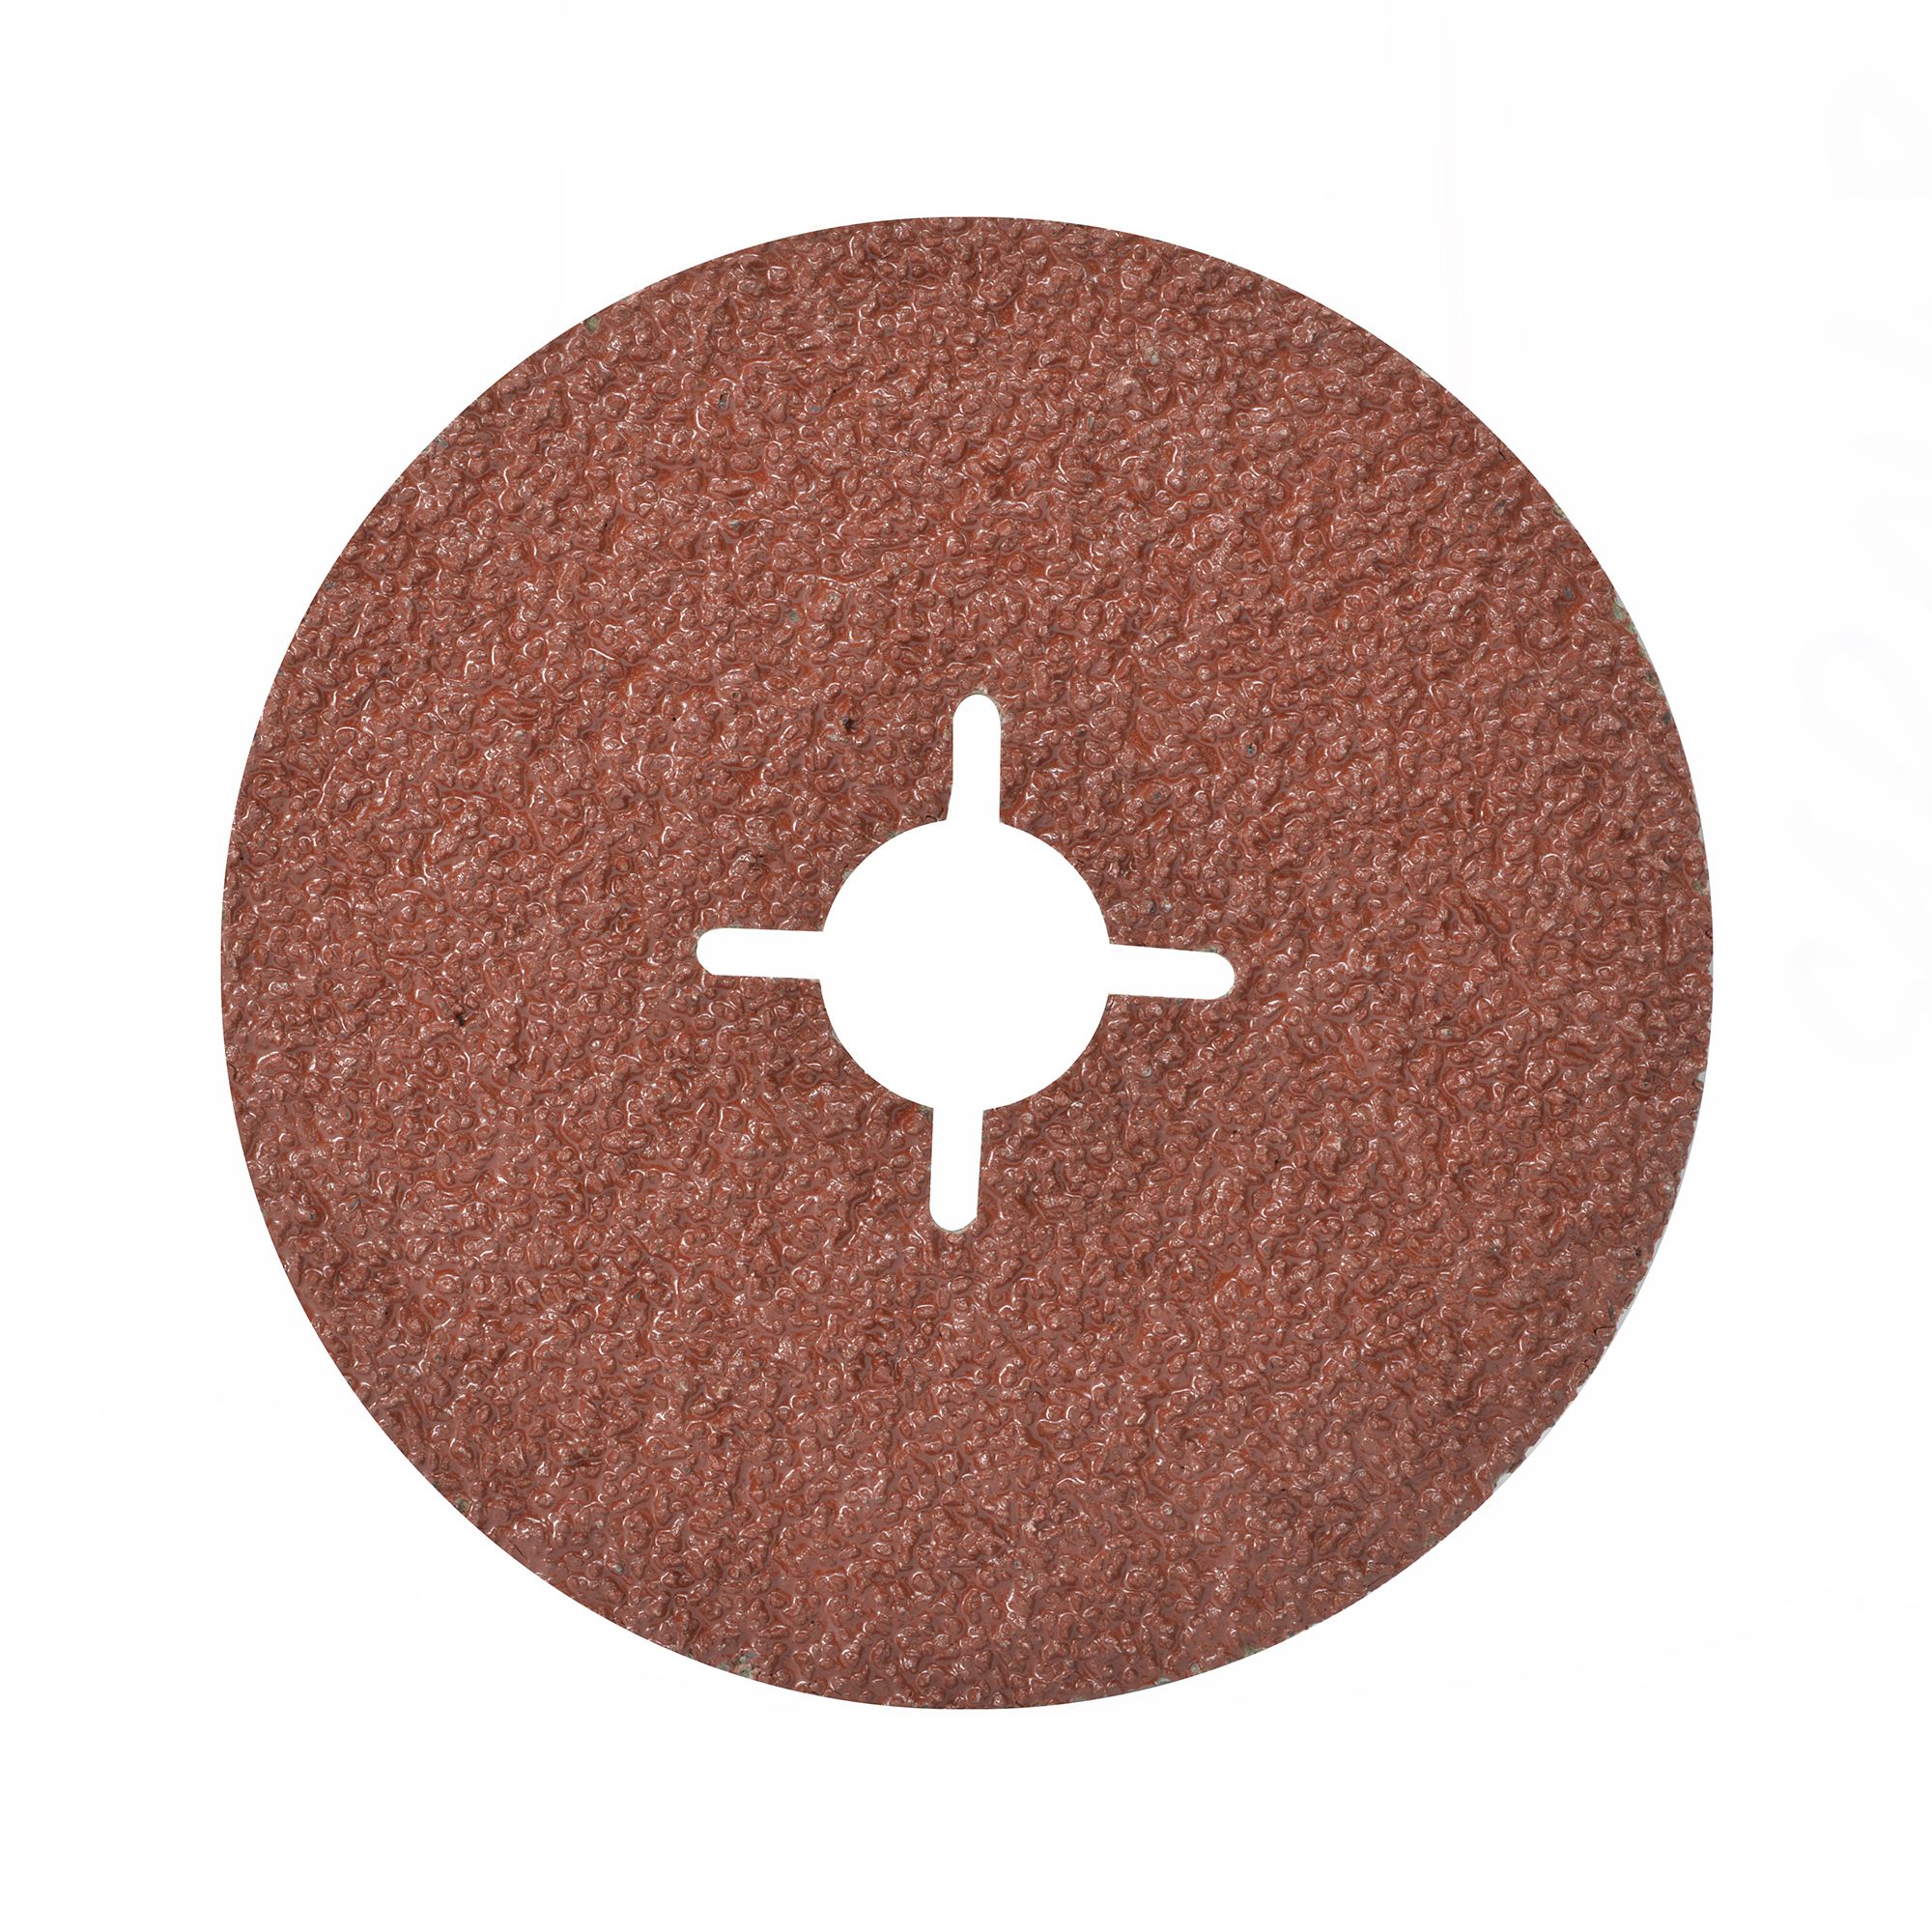 https://media.diy.com/is/image/Kingfisher/universal-fit-sanding-disc-set-punched-d-115mm-24-60-80-grit-pack-of-5~3663602449447_02c?$MOB_PREV$&$width=768&$height=768